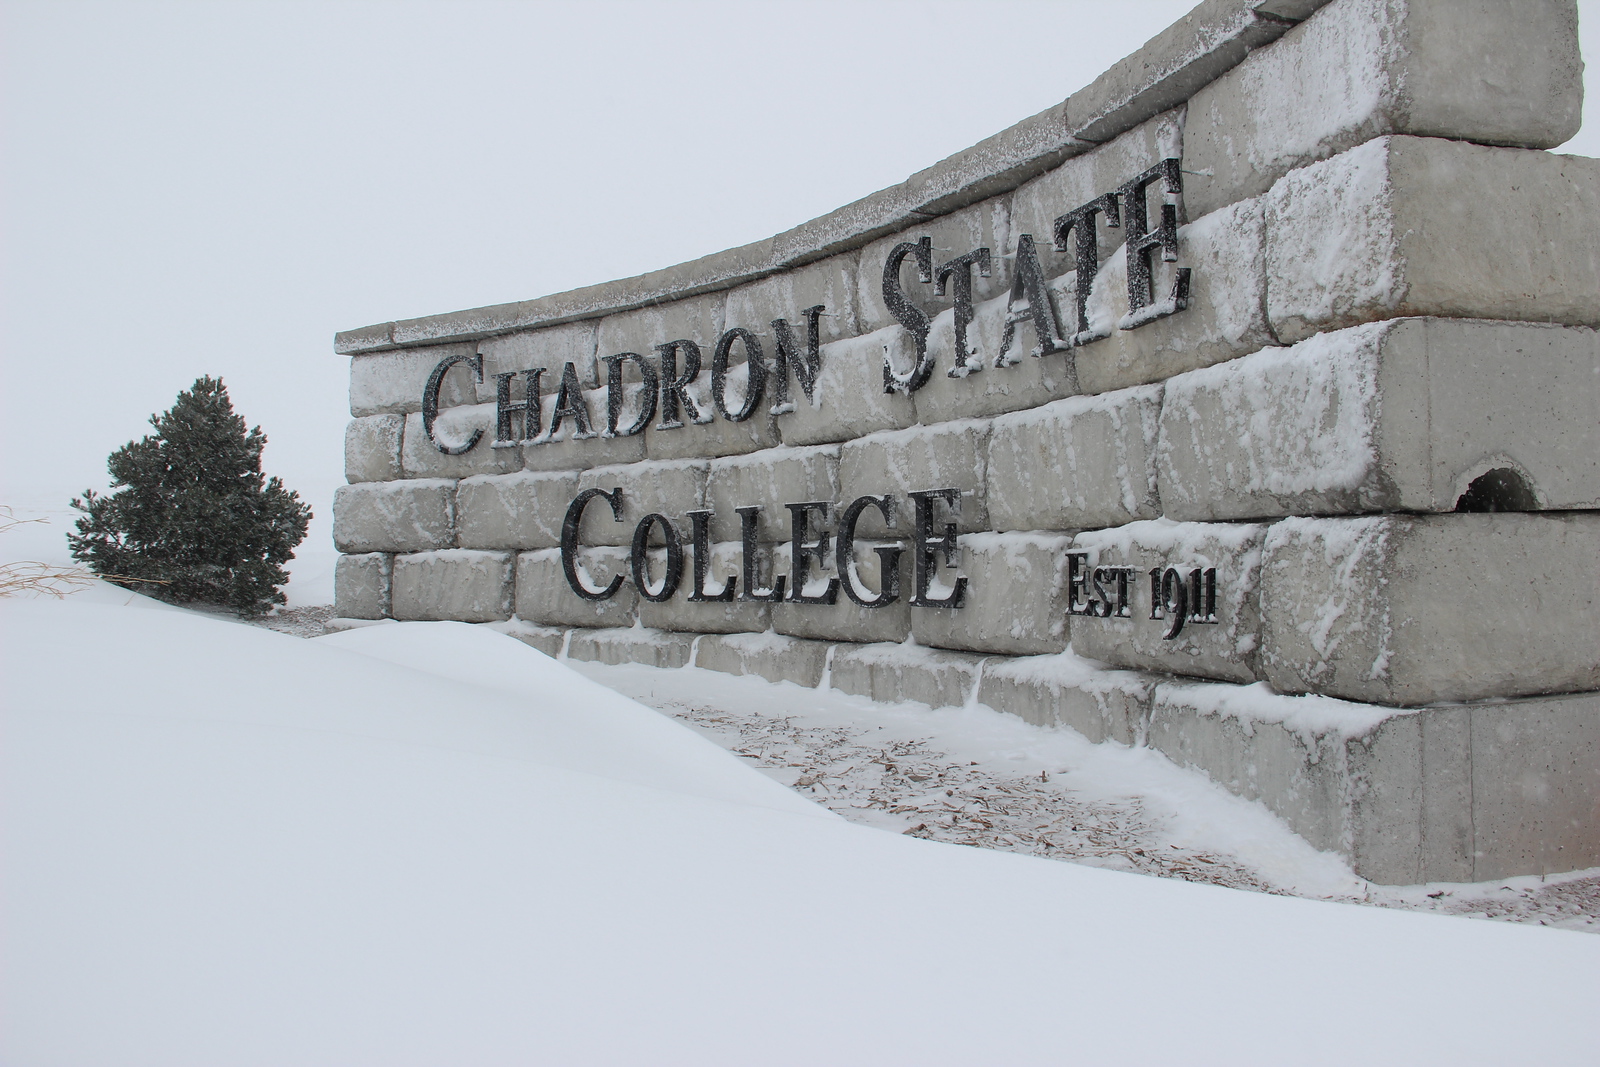 Campus east entrance sign